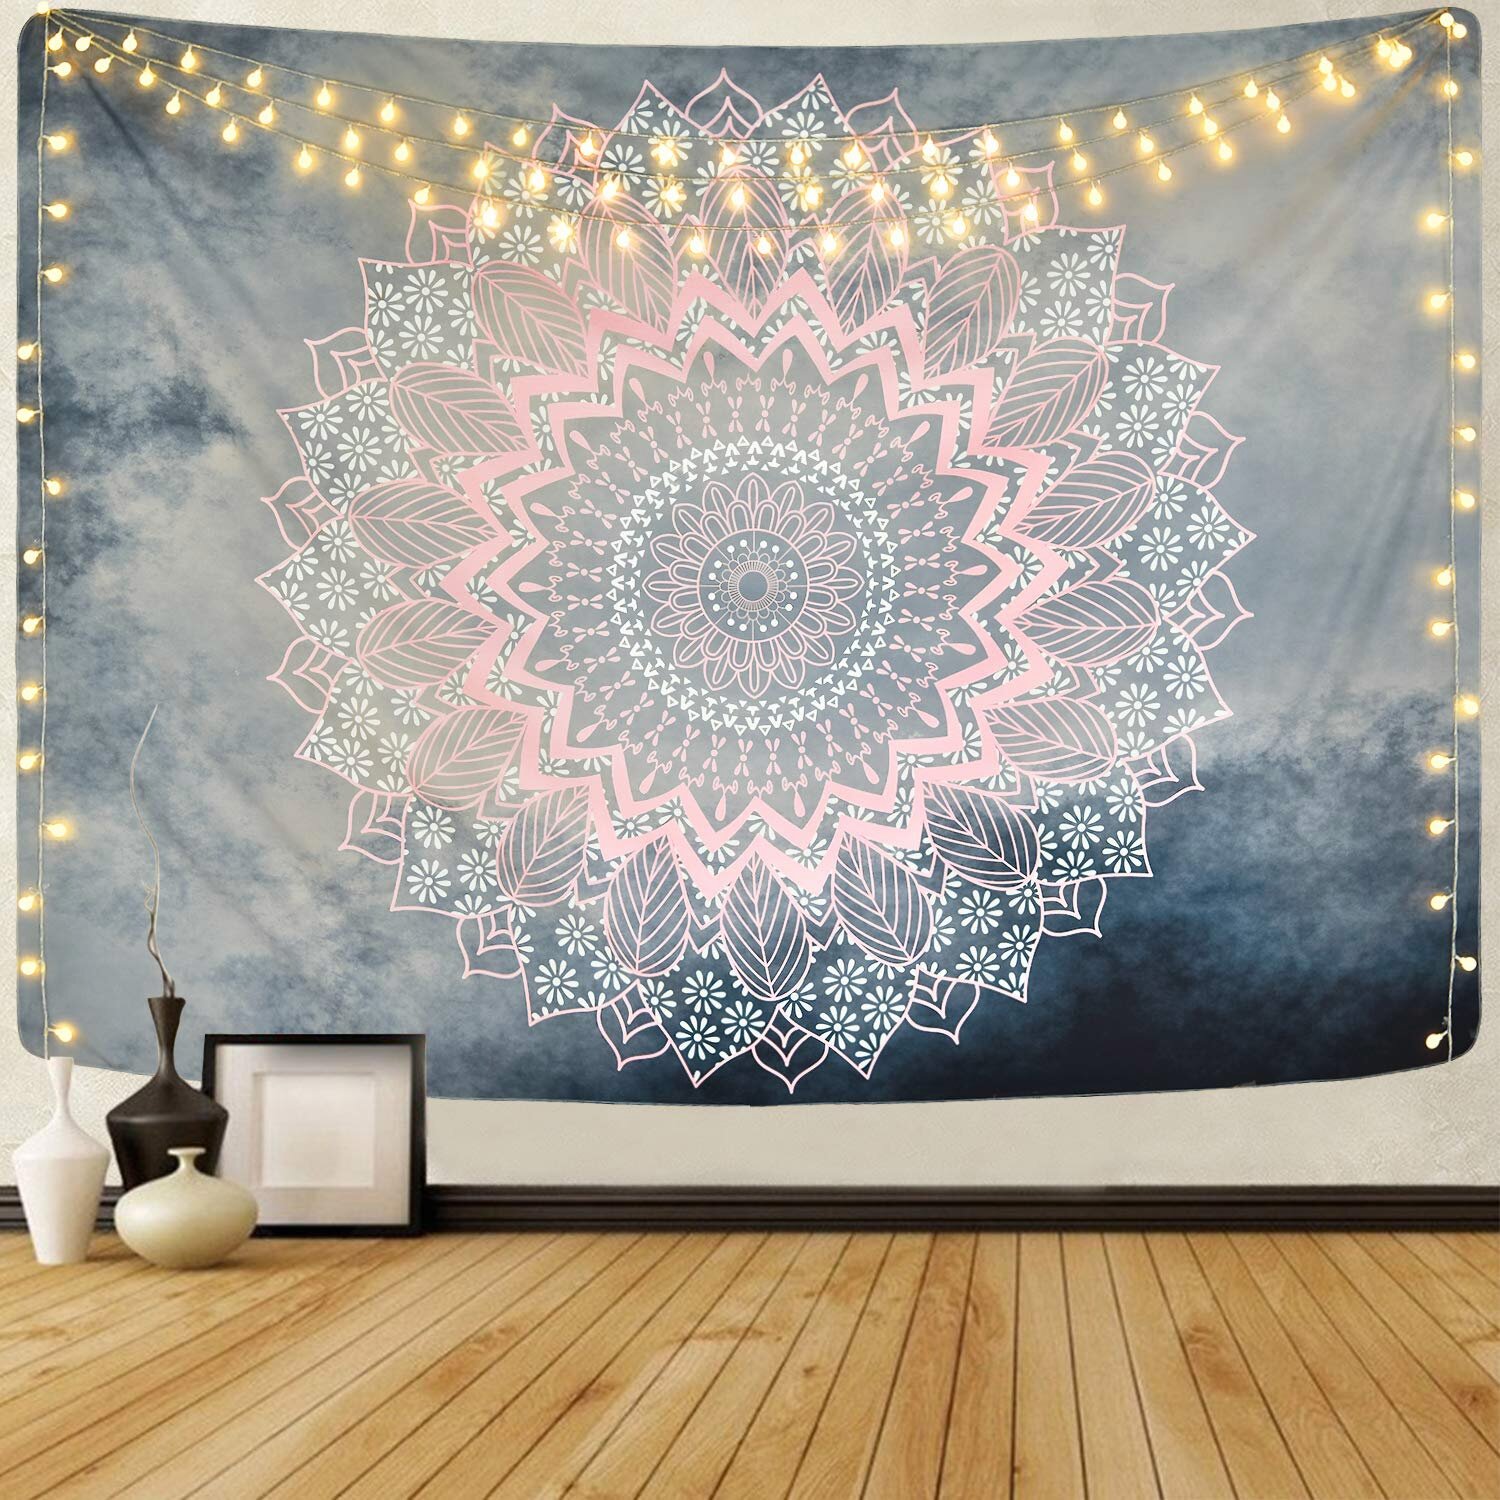 100% Natural Dyes Thread Spread Hippie Mandala Bohemian Psychedelic Ombre Tapestry Twin Gold